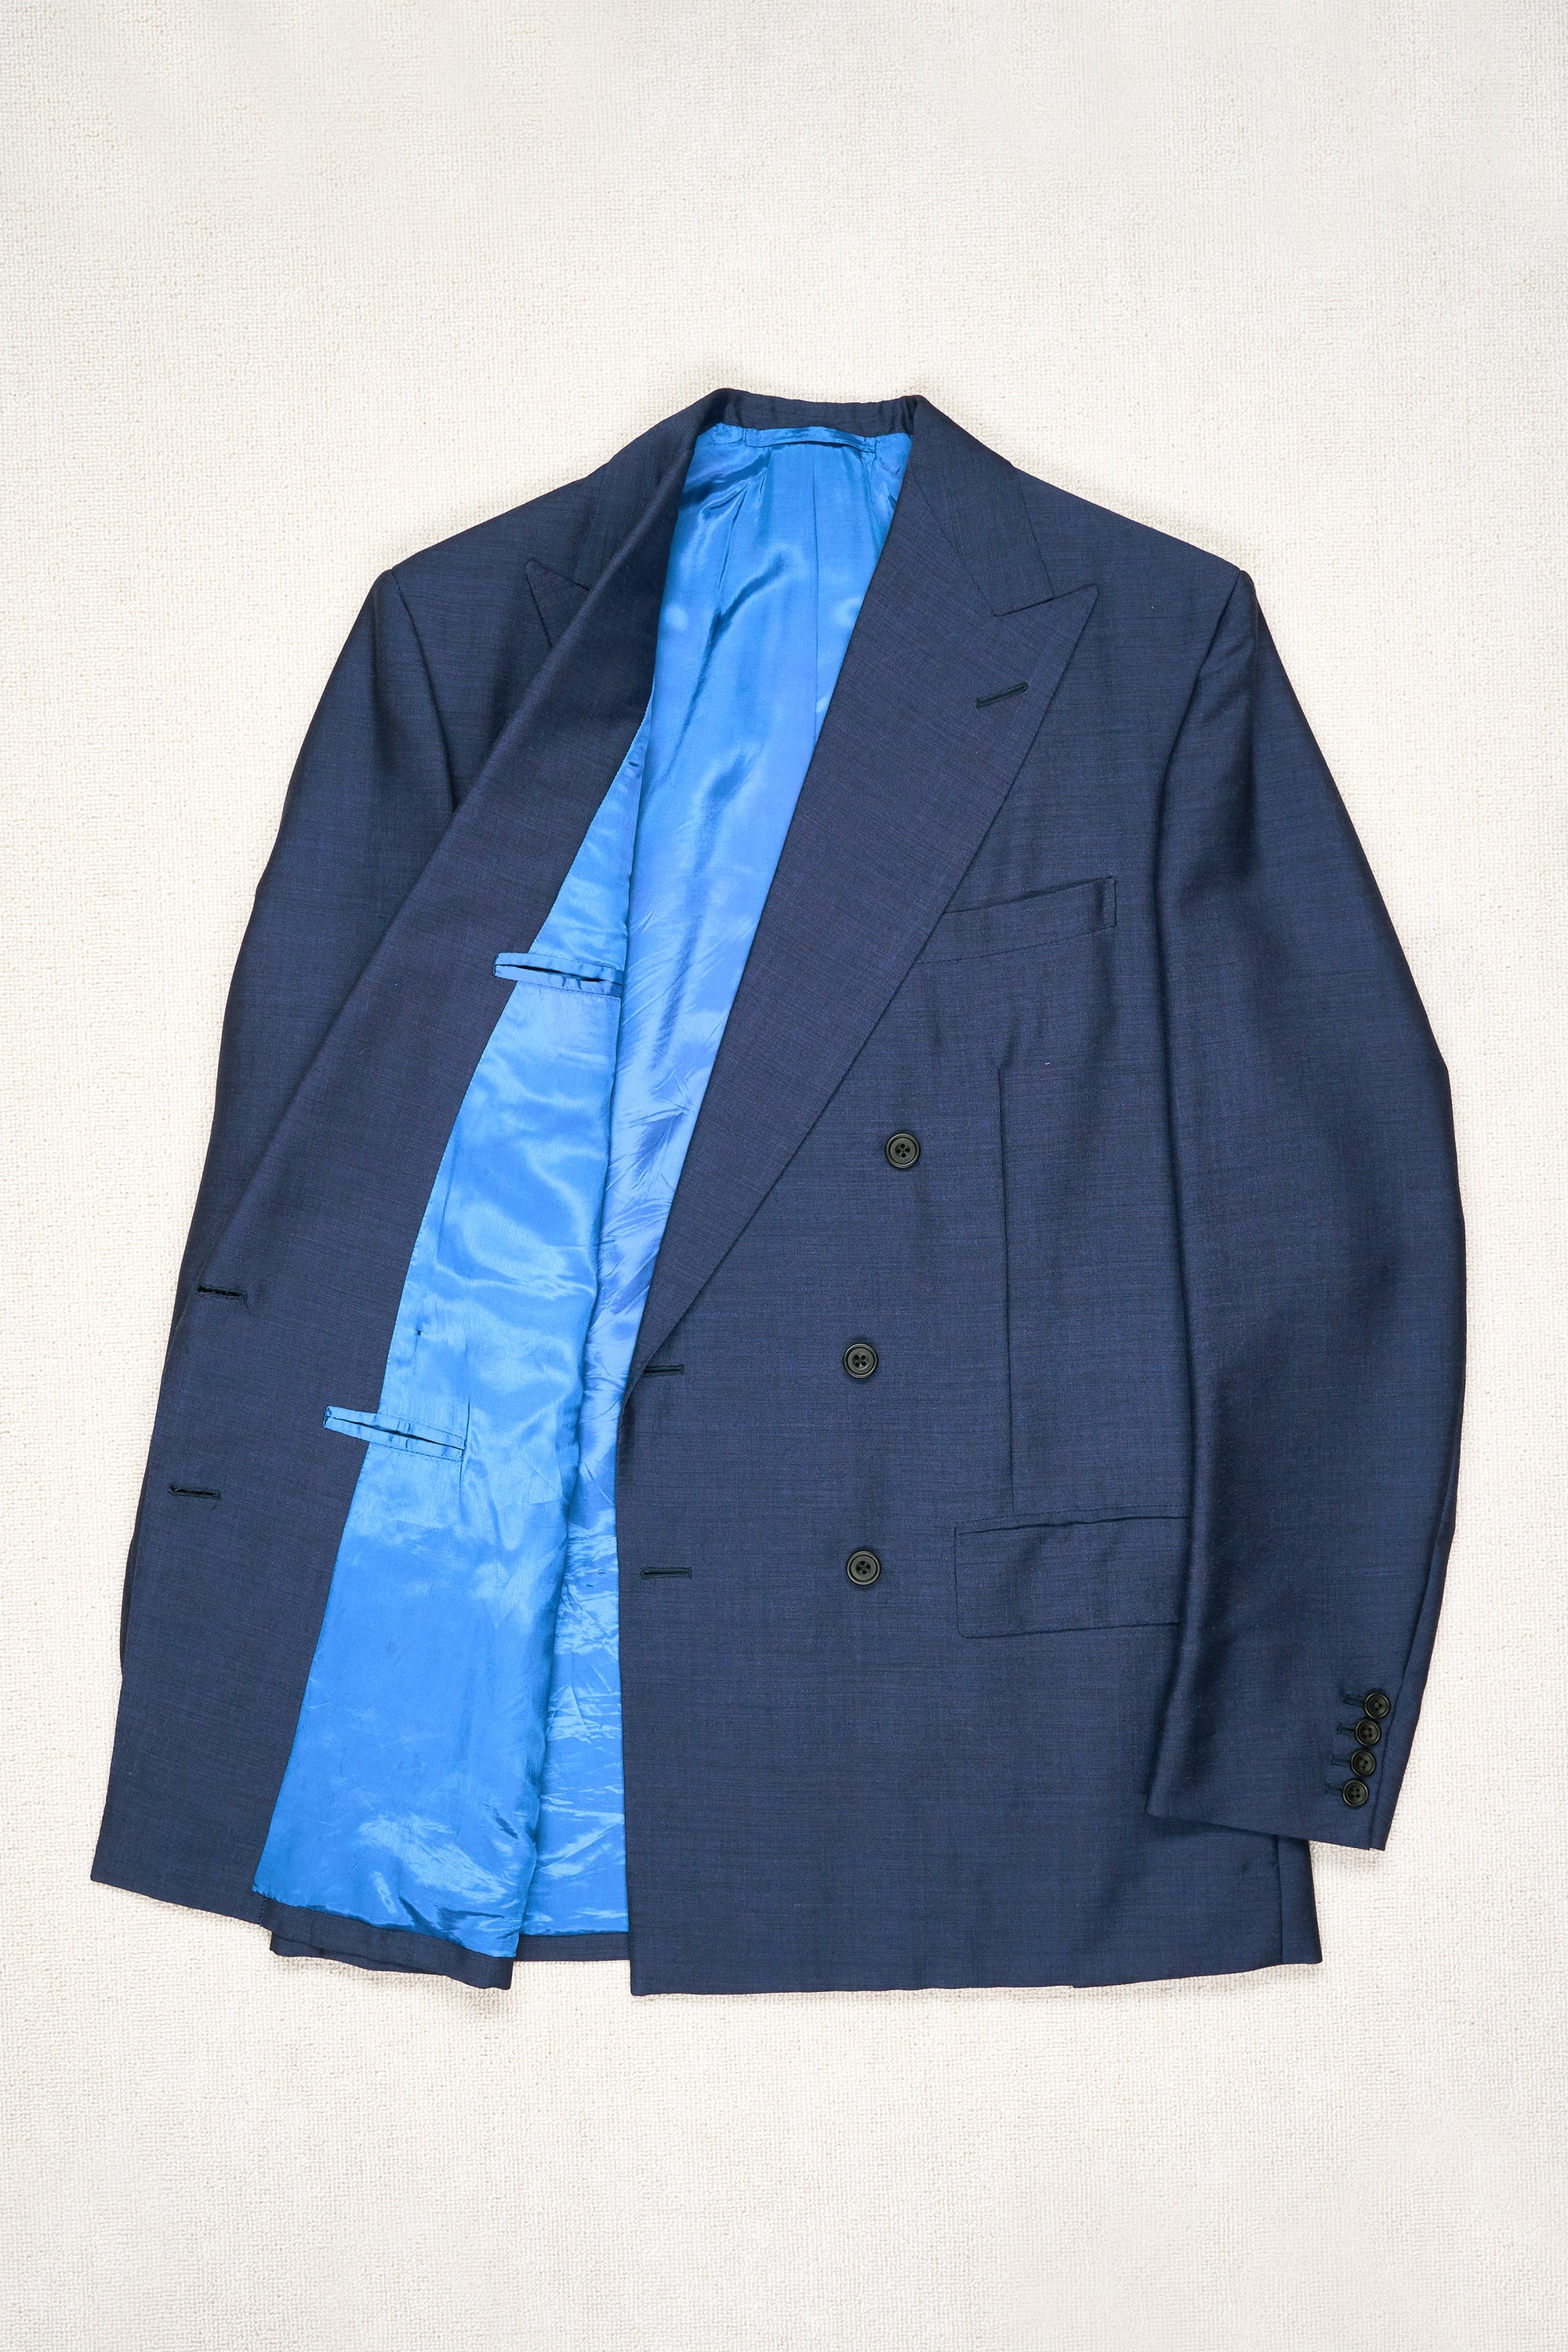 Anderson & Sheppard Blue Mohair Wool Double Breasted Suit